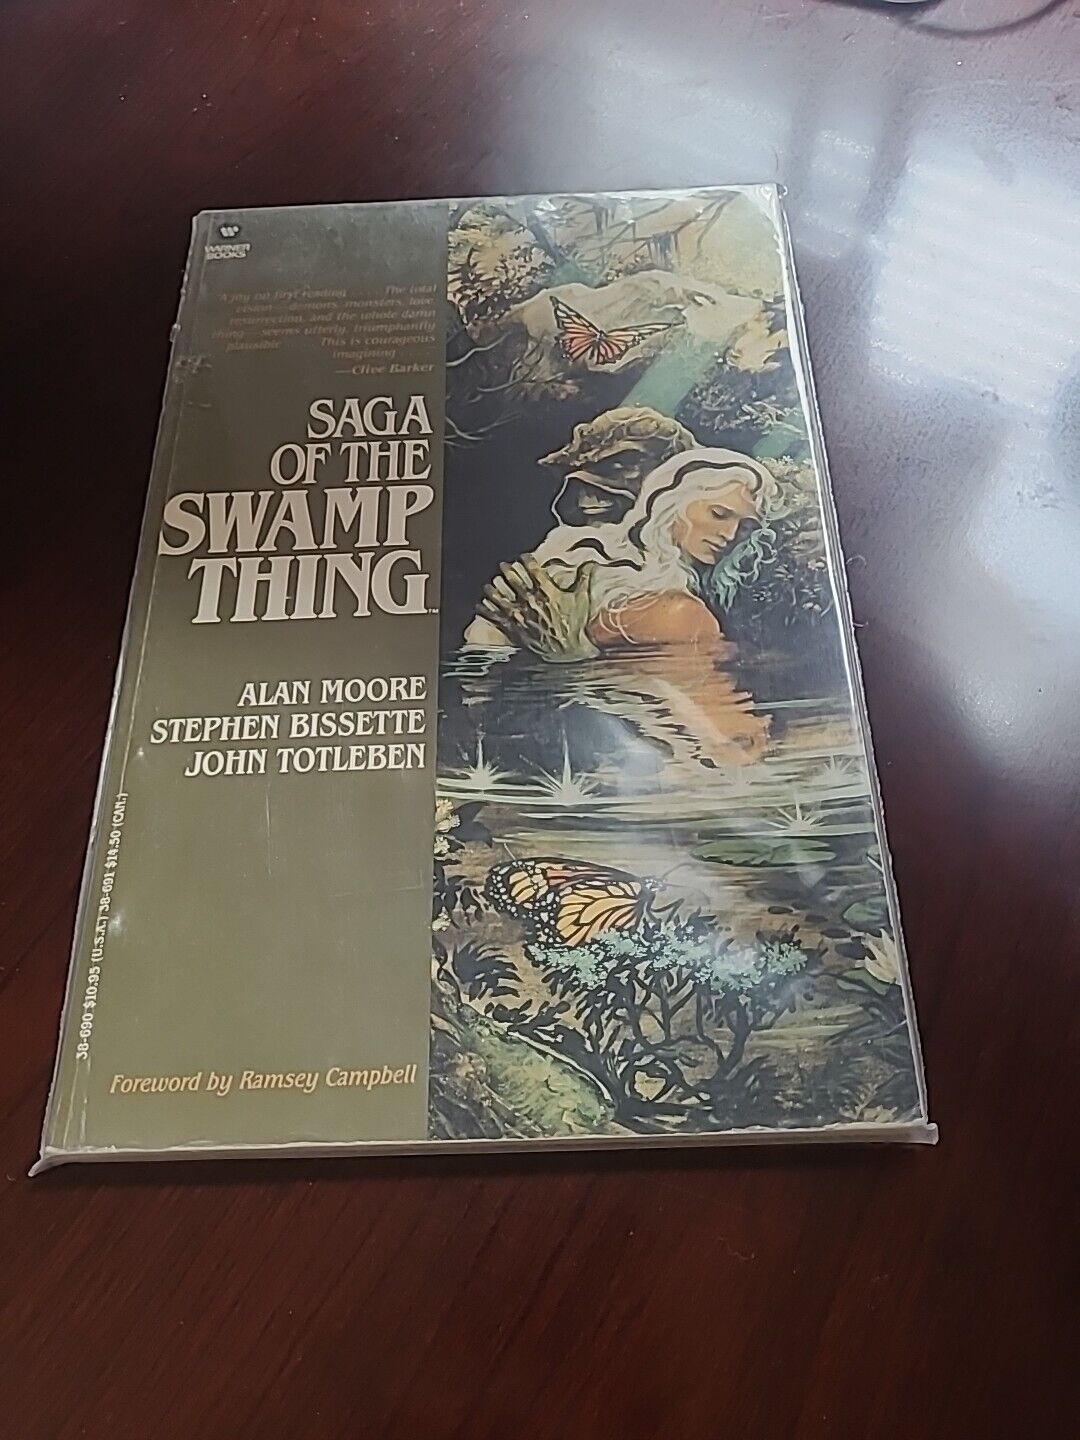 Saga of the Swamp Thing SC TPB - 1st Edition - Alan Moore - 1987 - NM